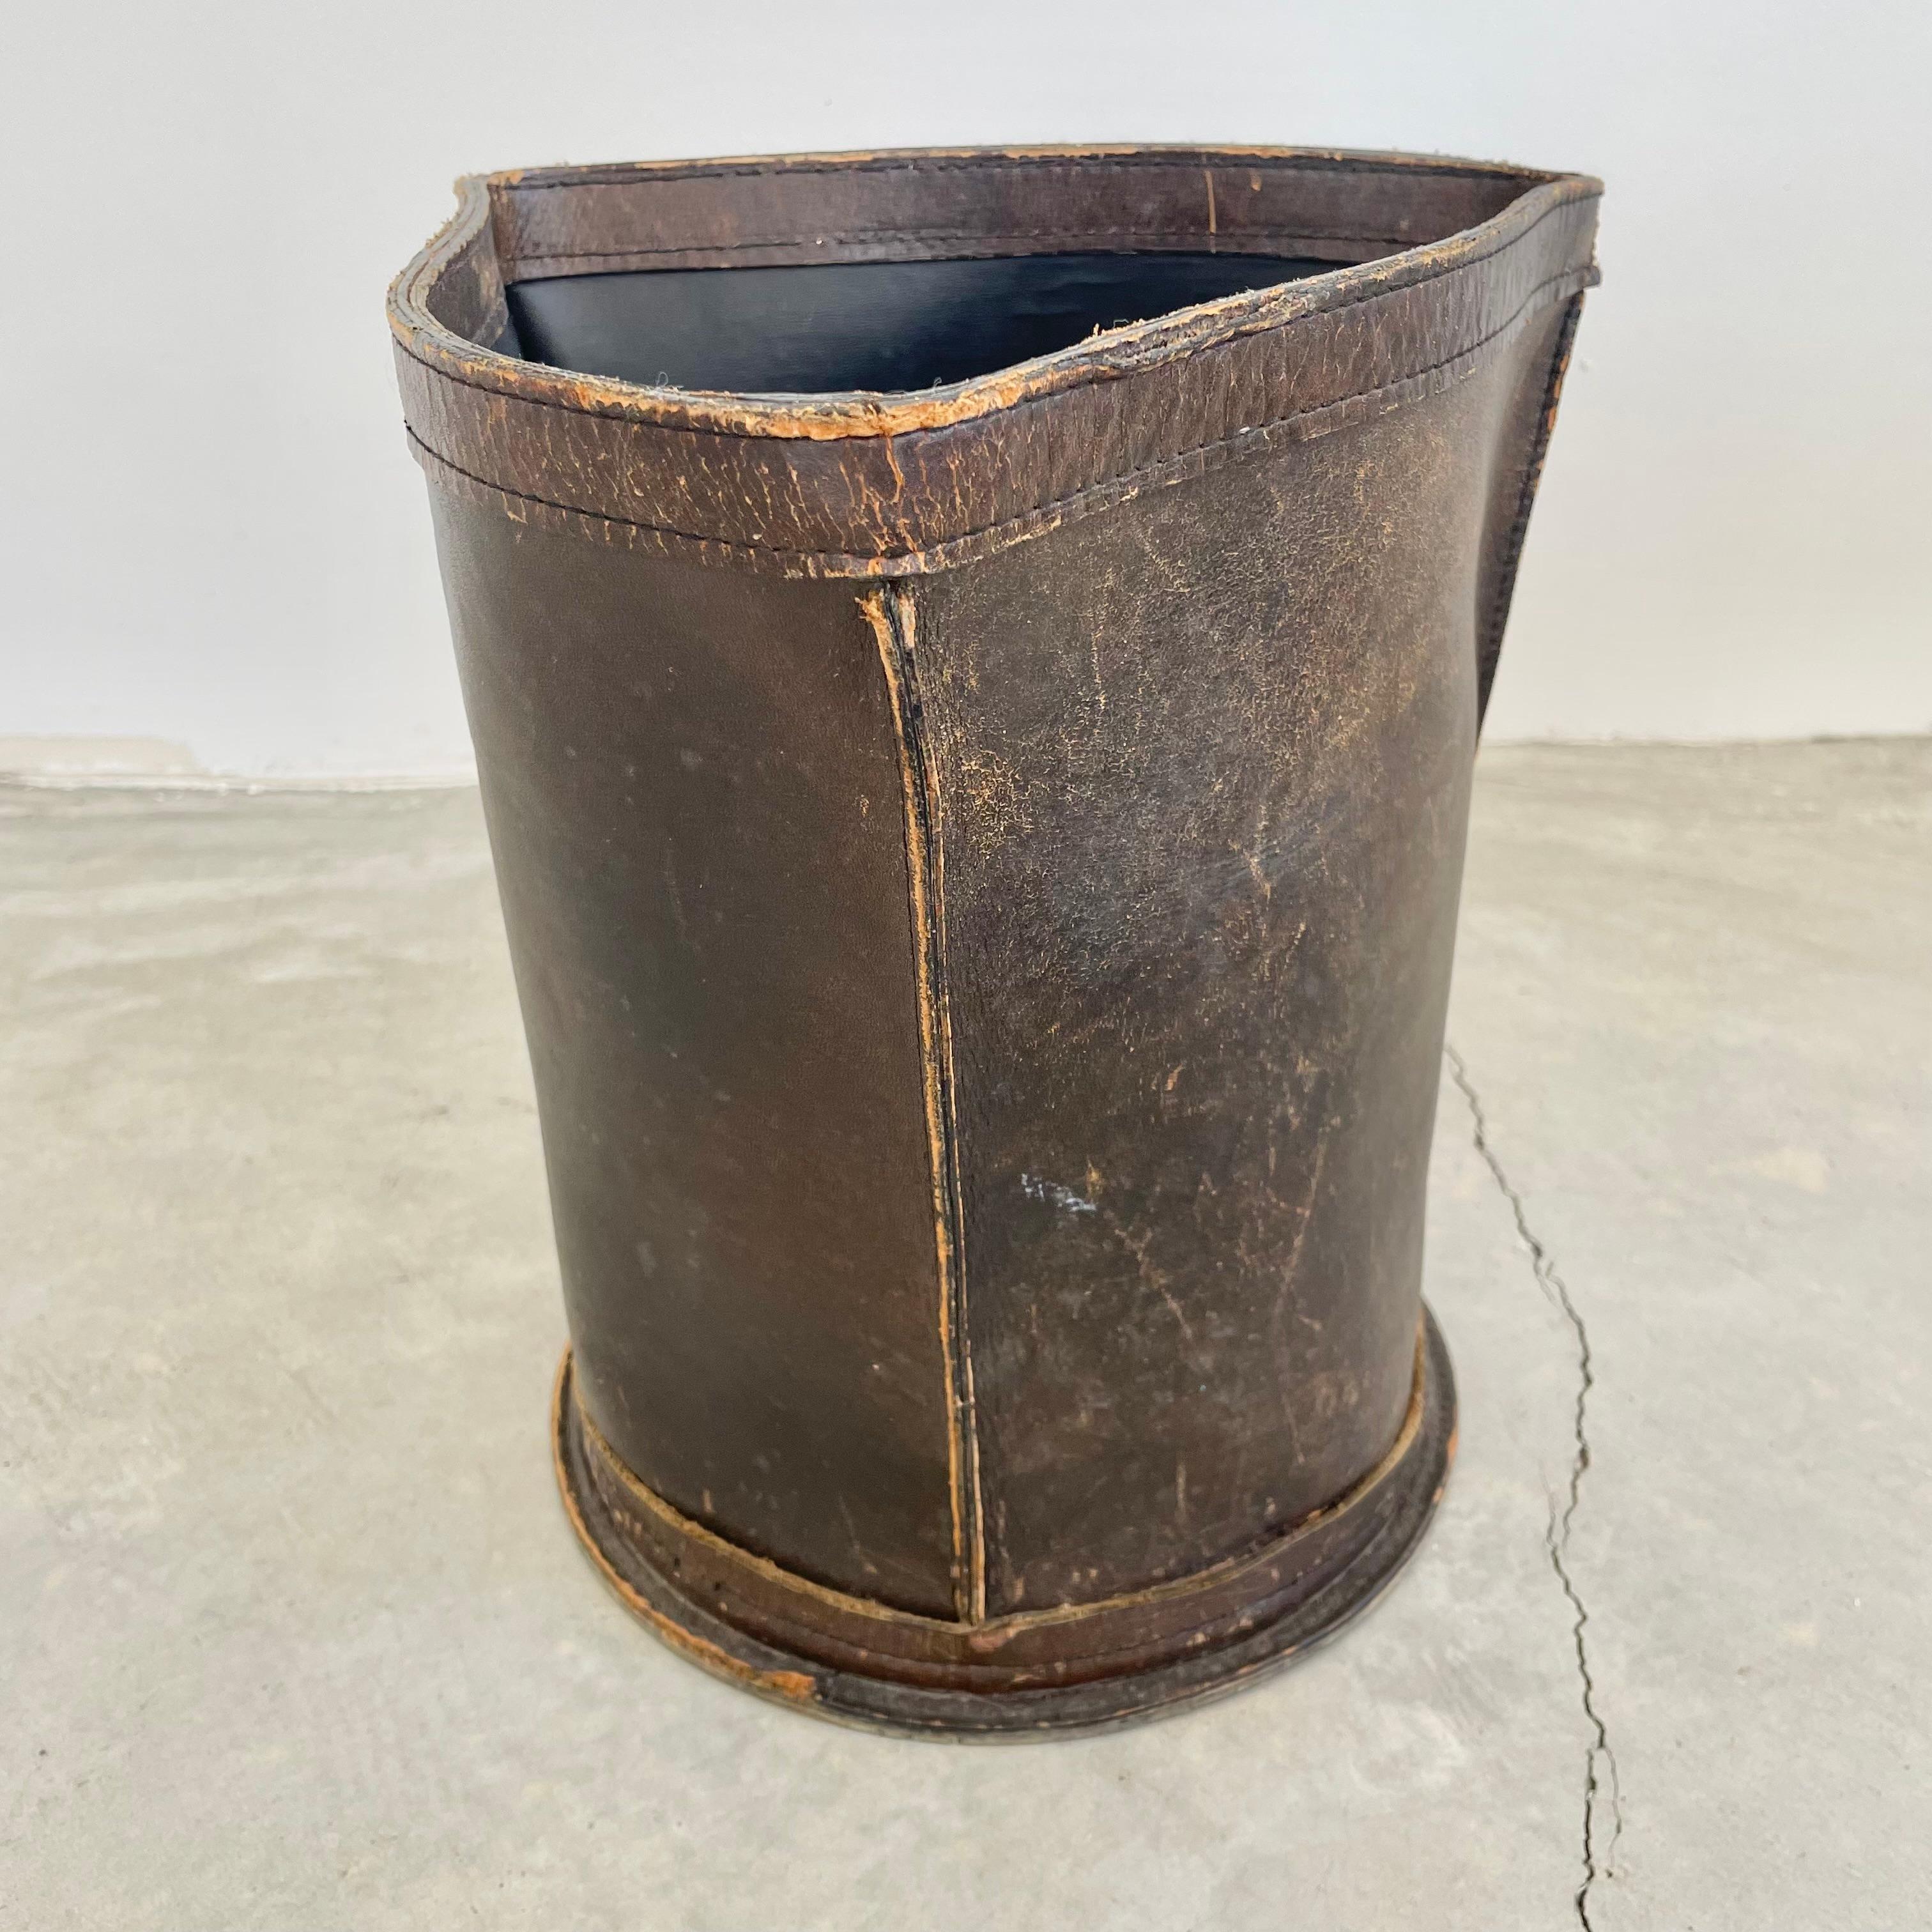 Beautiful distressed leather waste bin. Fully made of a thick chocolate brown leather. Triangular shape on a circular base giving it unique lines. Great patina from years of use. High quality leather that just gets better with age.